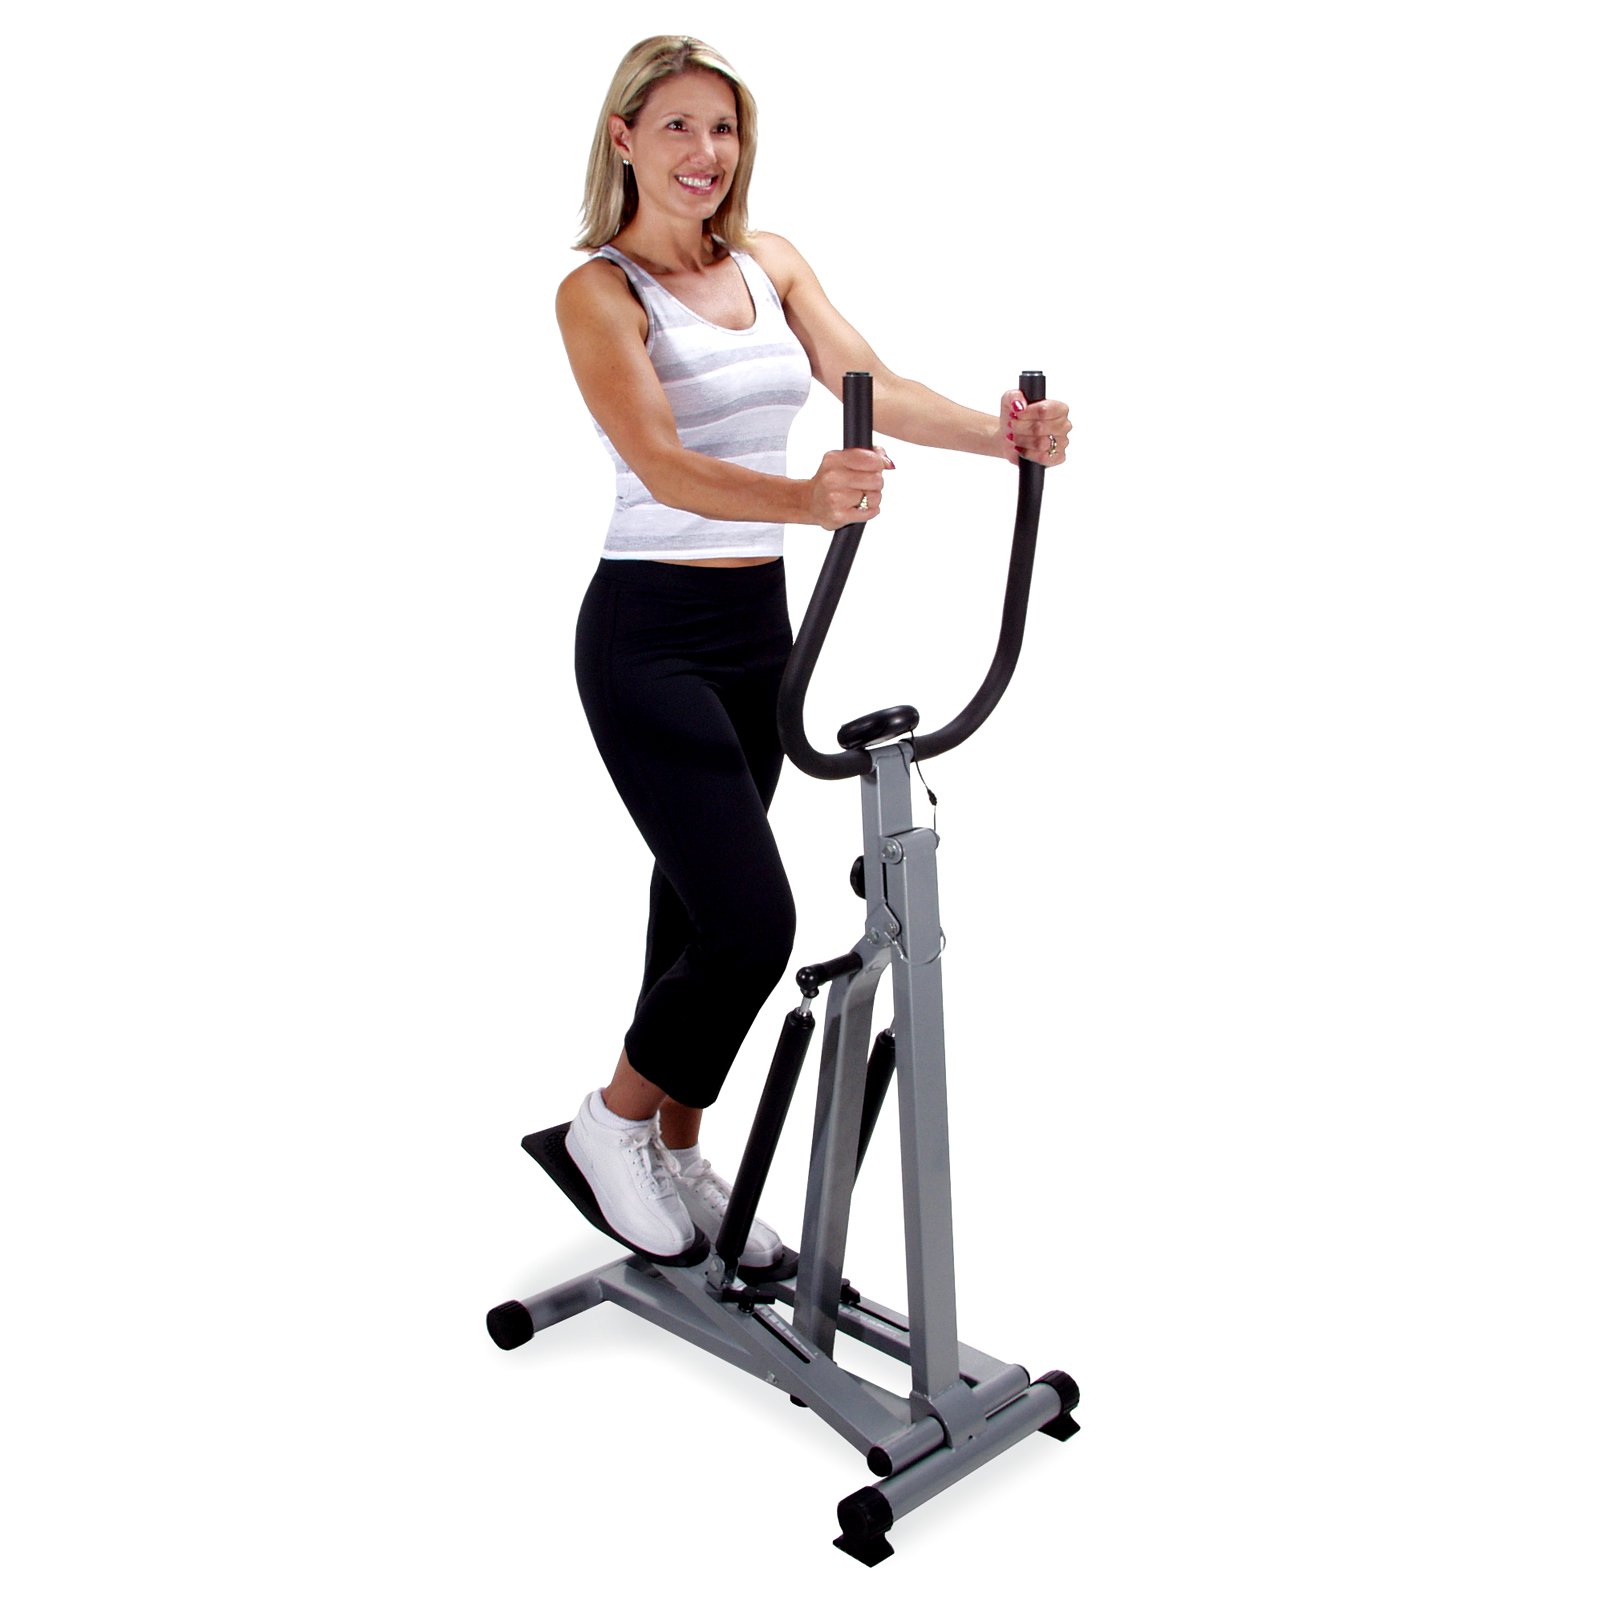 Stamina Products 40-0069 Spacemate Adjustable Folding Fitness Stepper - image 2 of 3